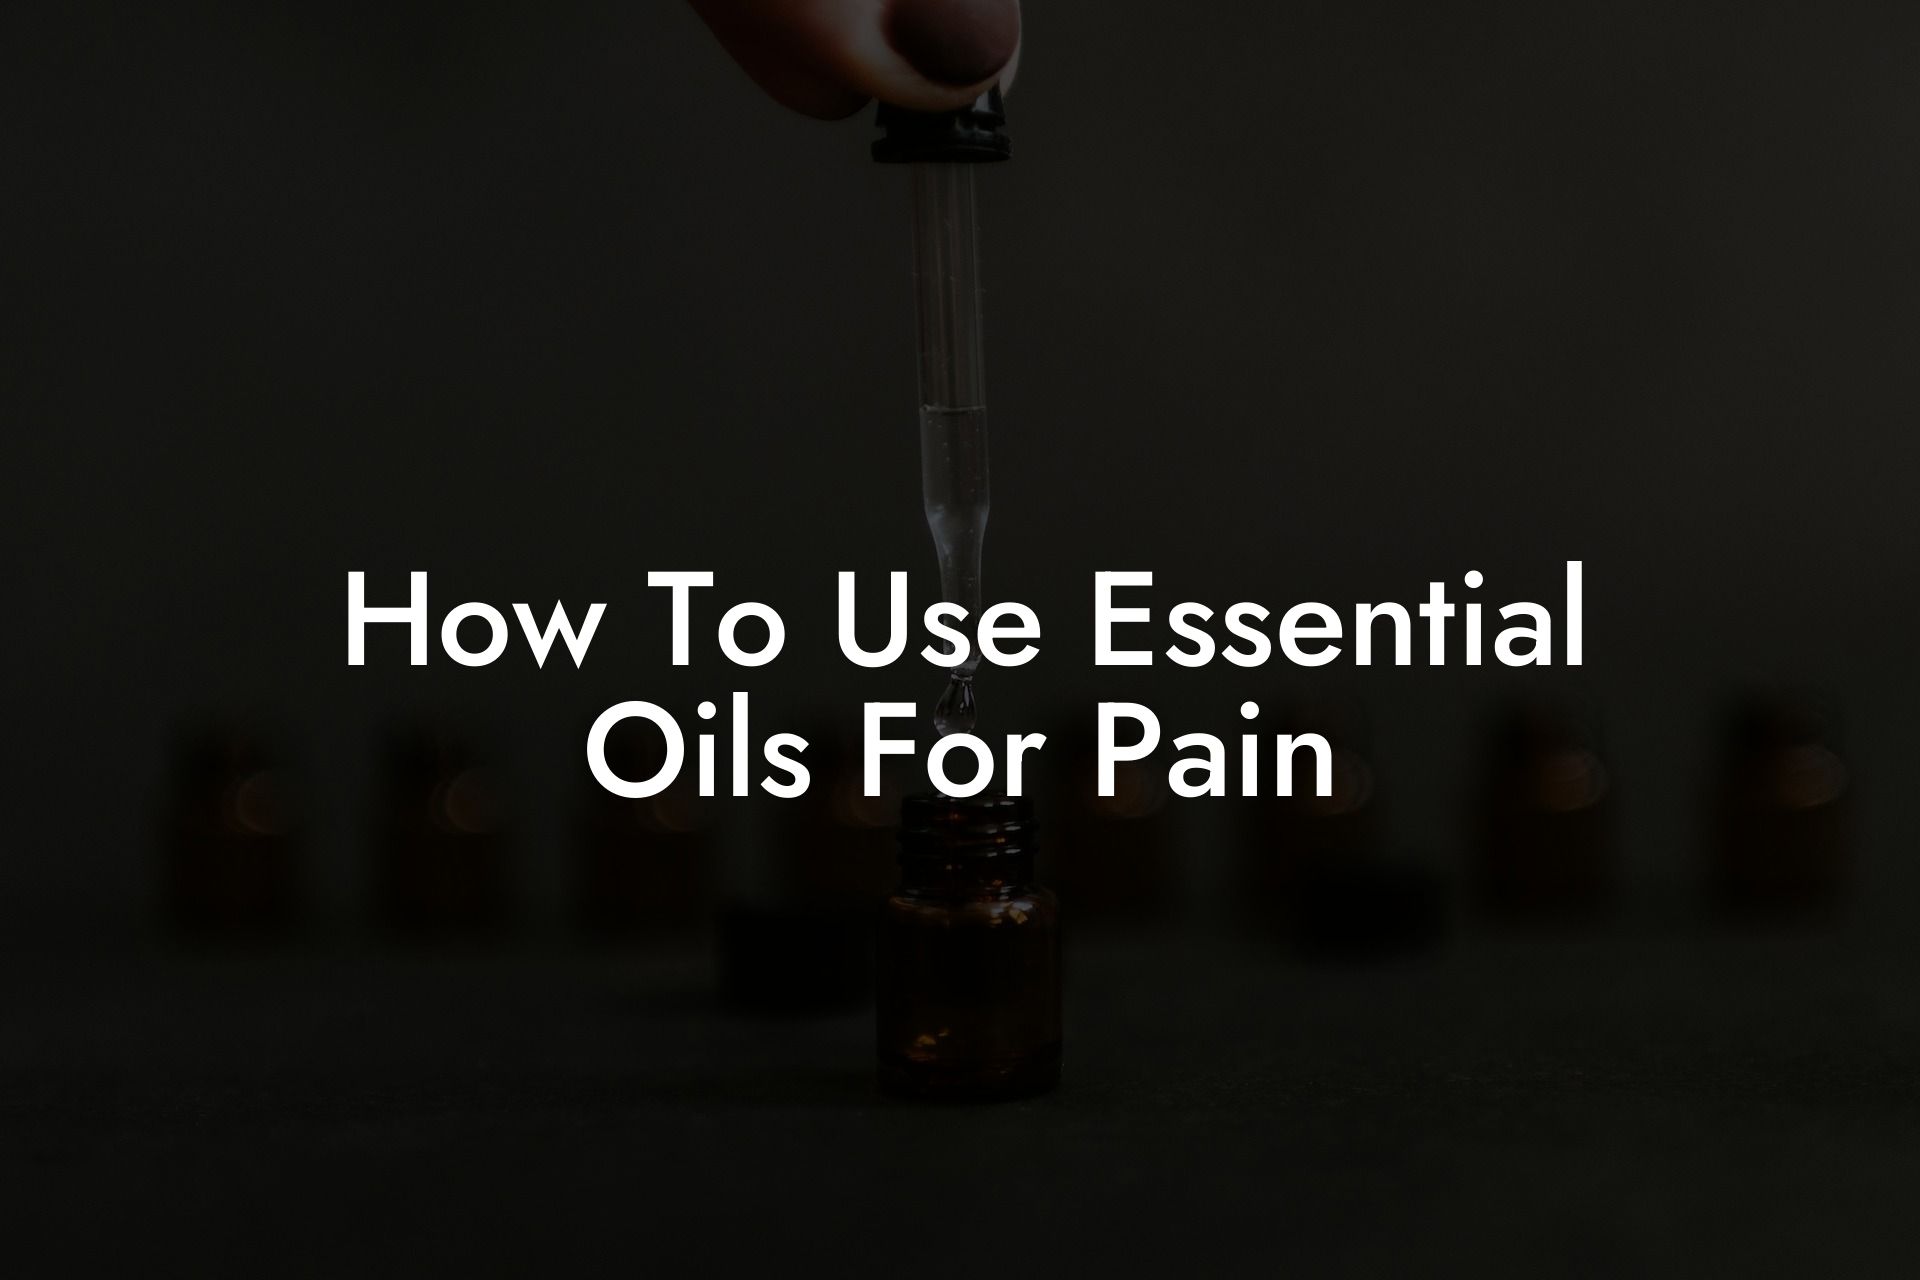 How To Use Essential Oils For Pain